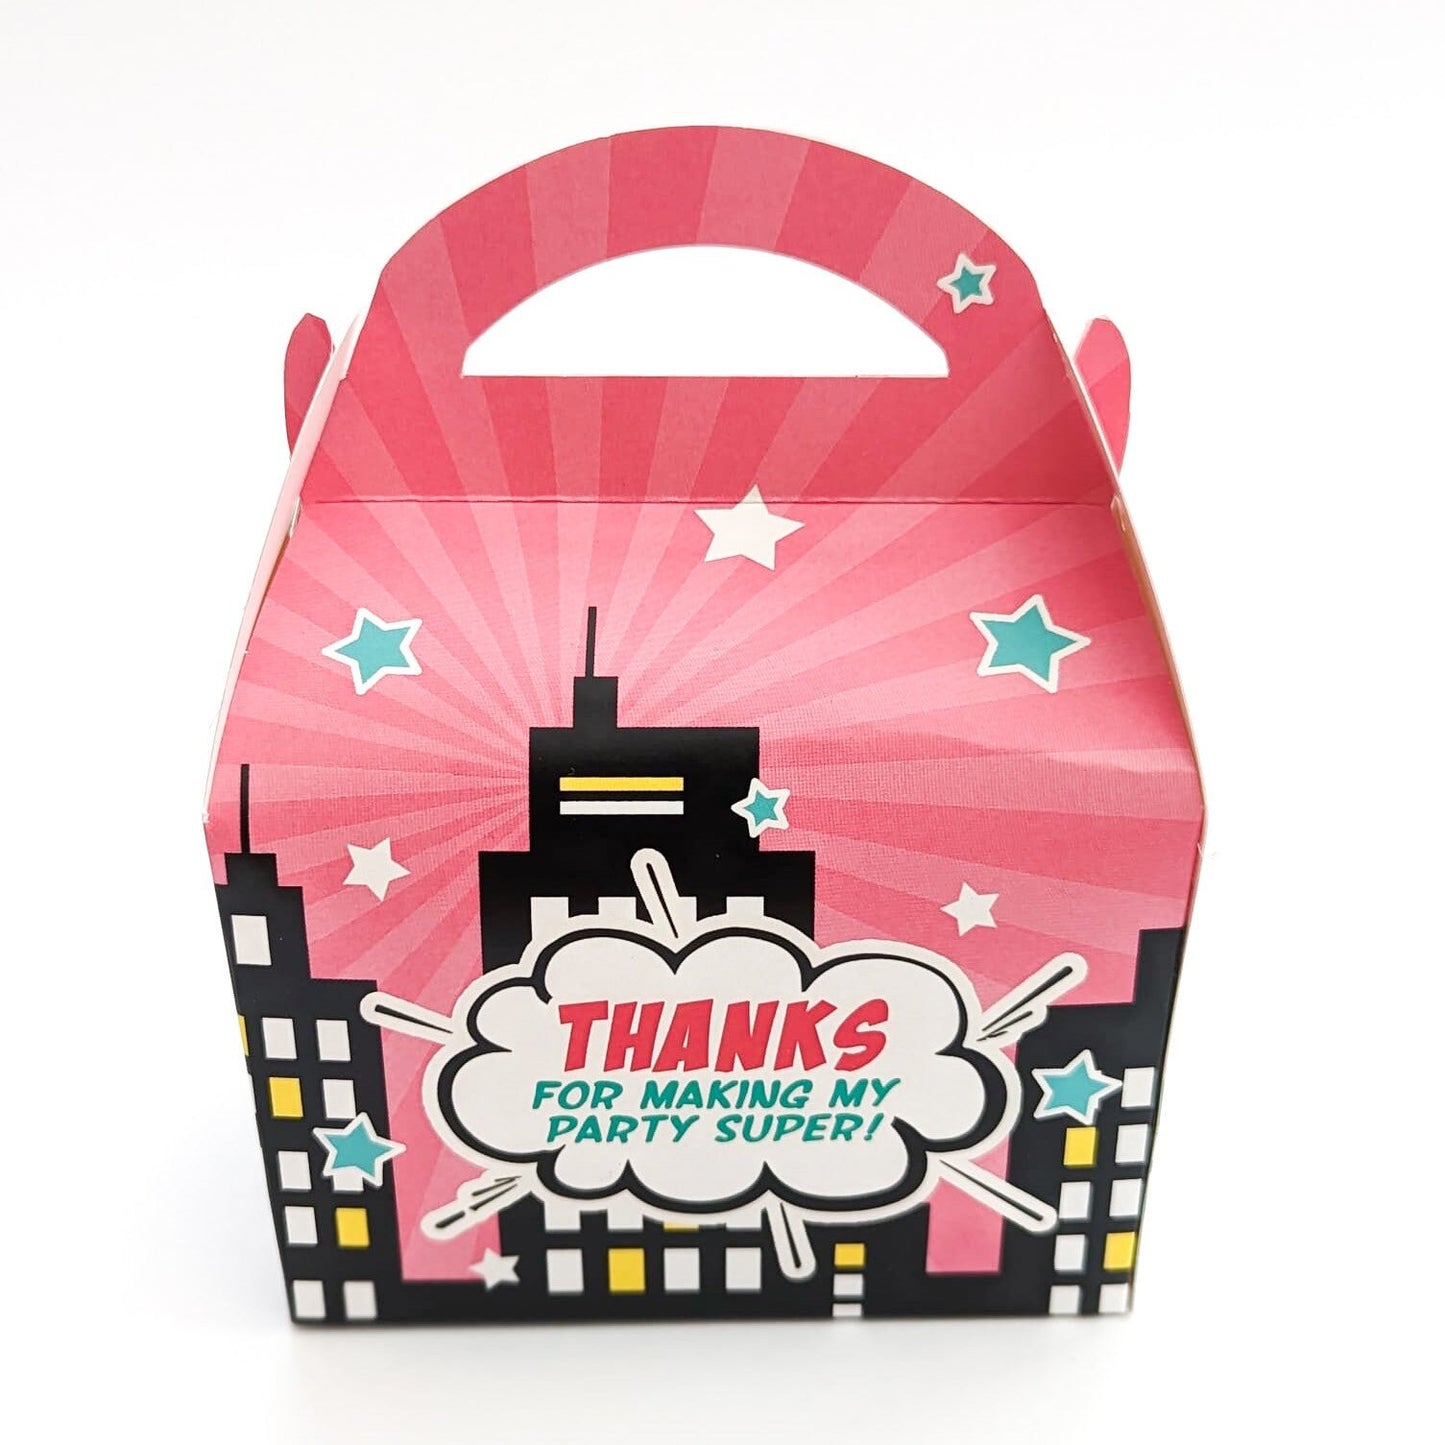 Comic Book Superhero Girls Personalised Children’s Party Box Gift Bag Favour